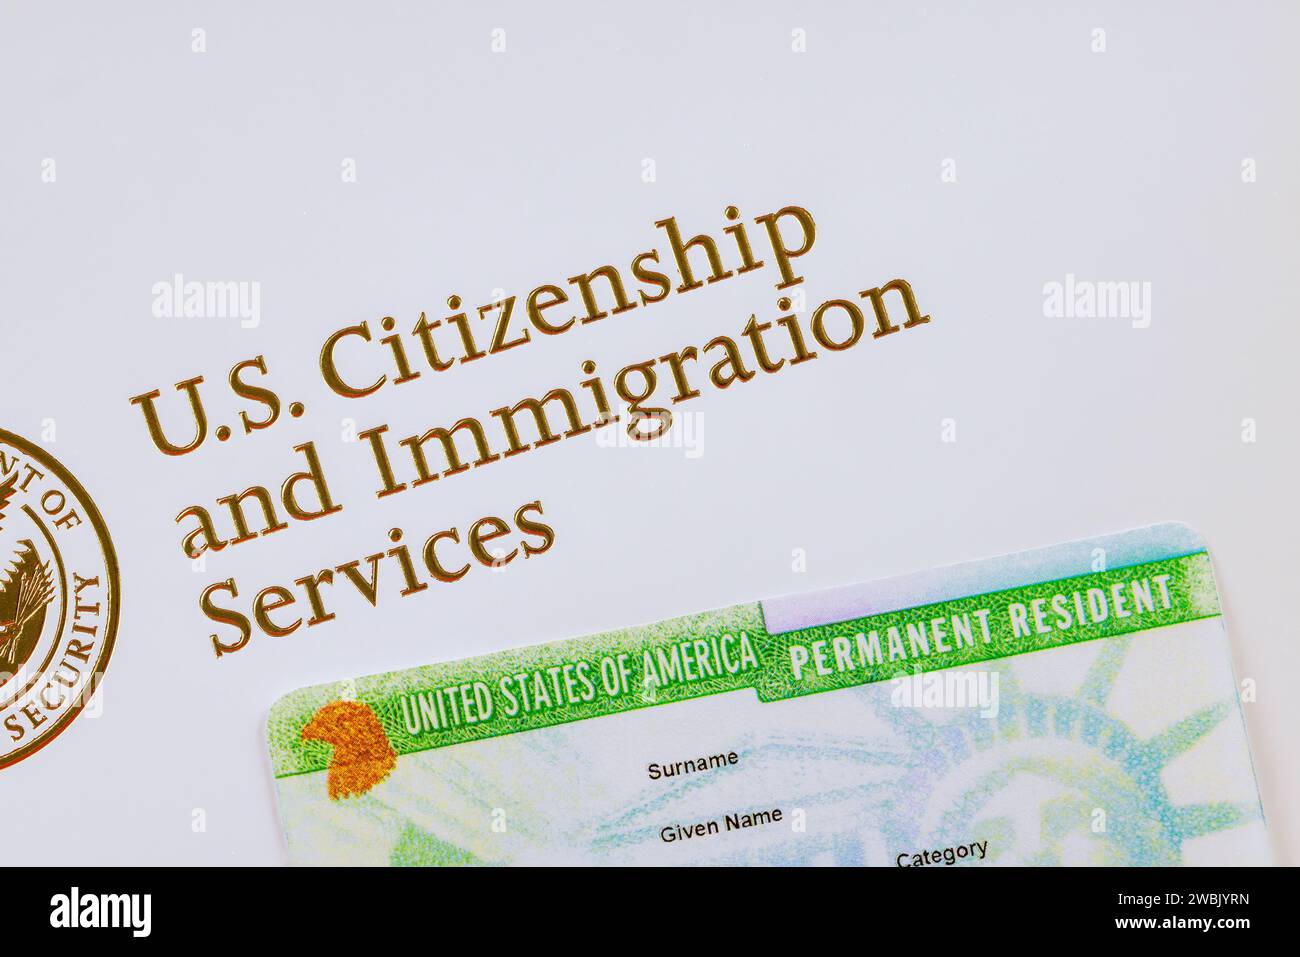 Le résident permanent est American immigrant documents Department of Homeland Security United States Citizenship and Immigration Services Banque D'Images